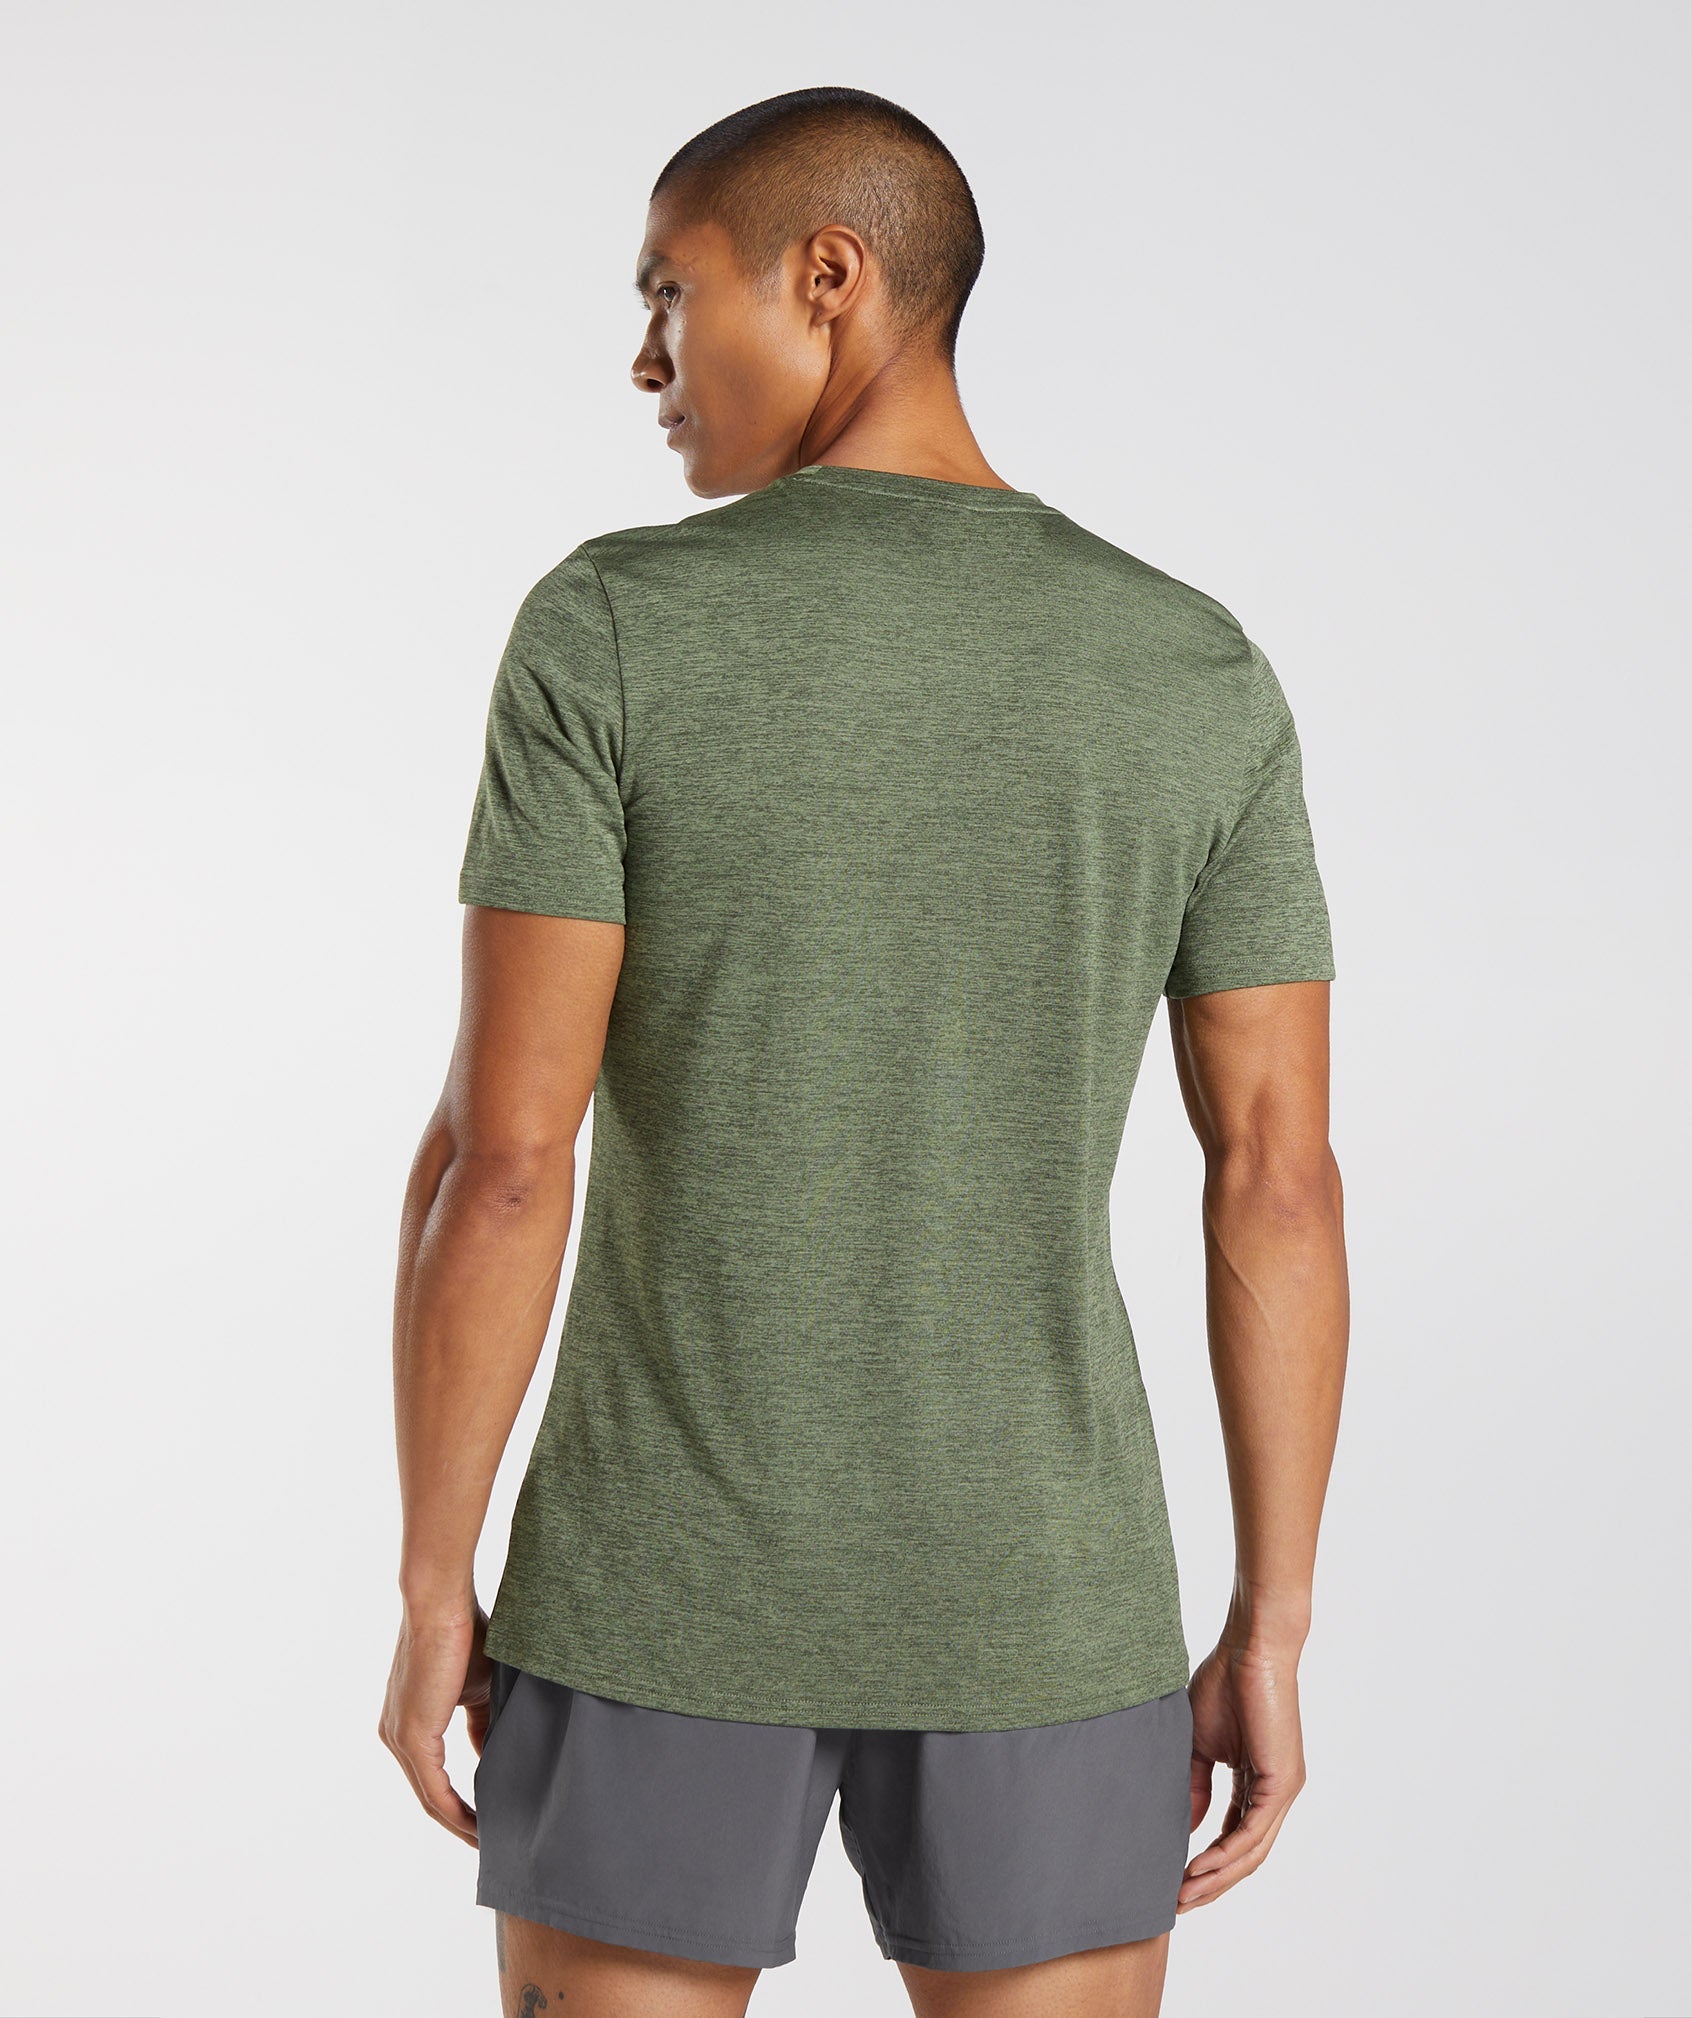 Arrival Marl T-Shirt in Core Olive/Kalamata Olive Marl - view 2